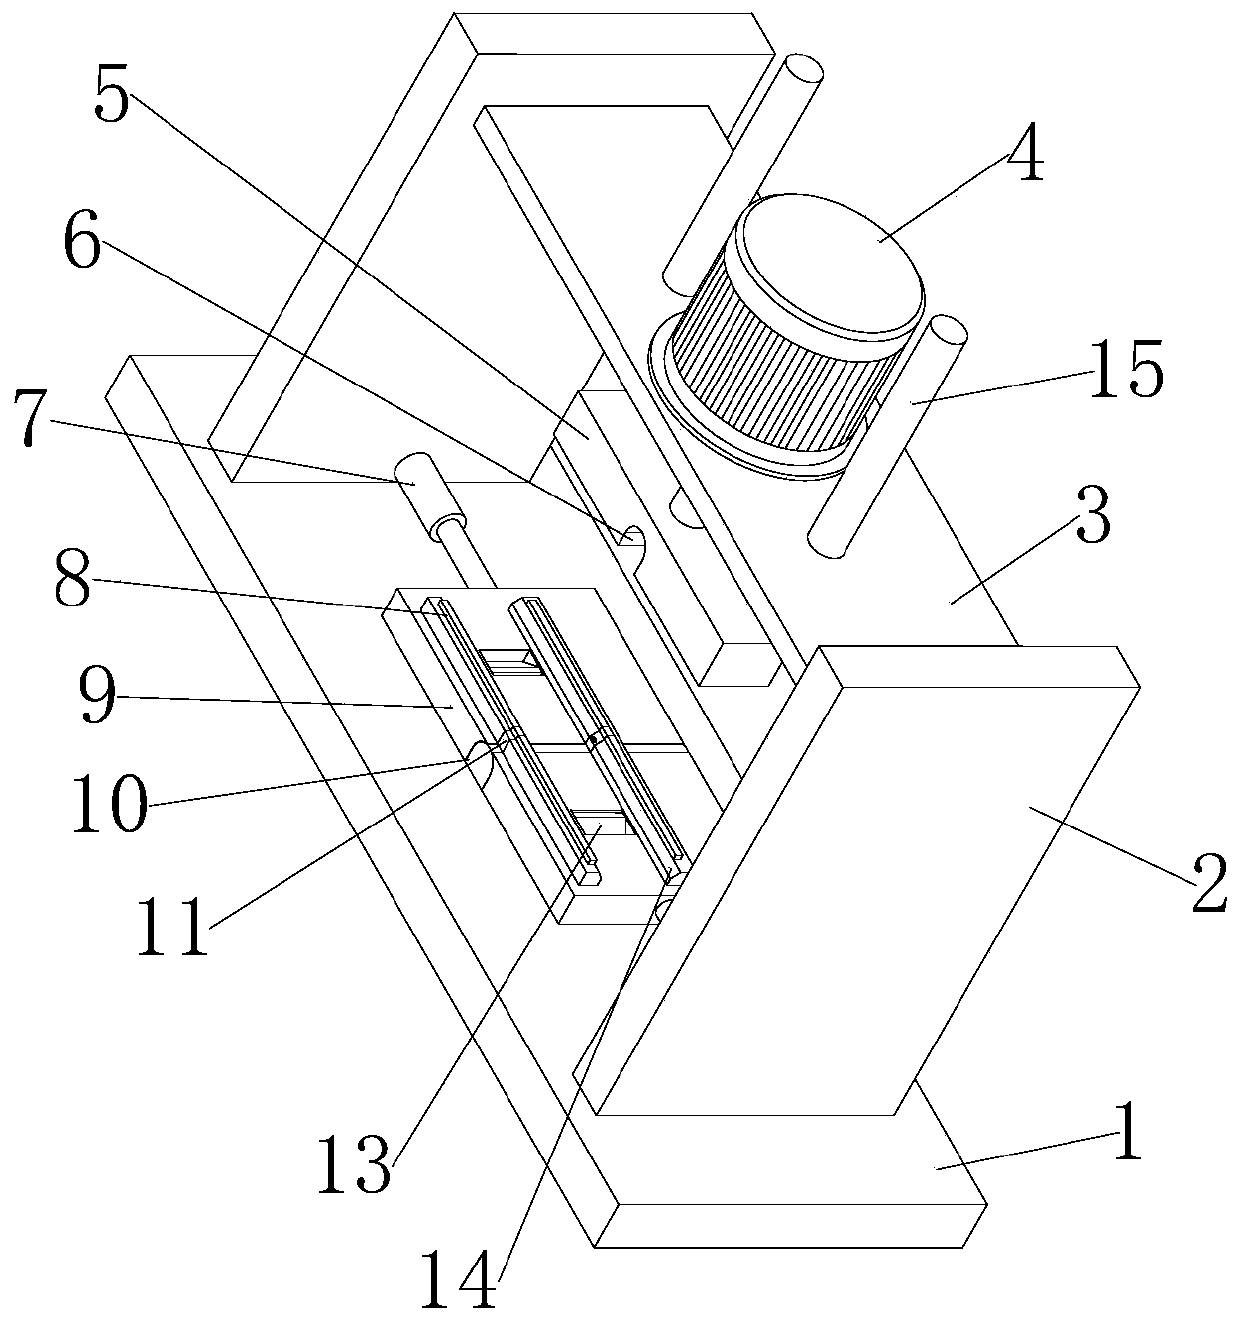 Graded punch forming method for automobile sheet metal connecting piece